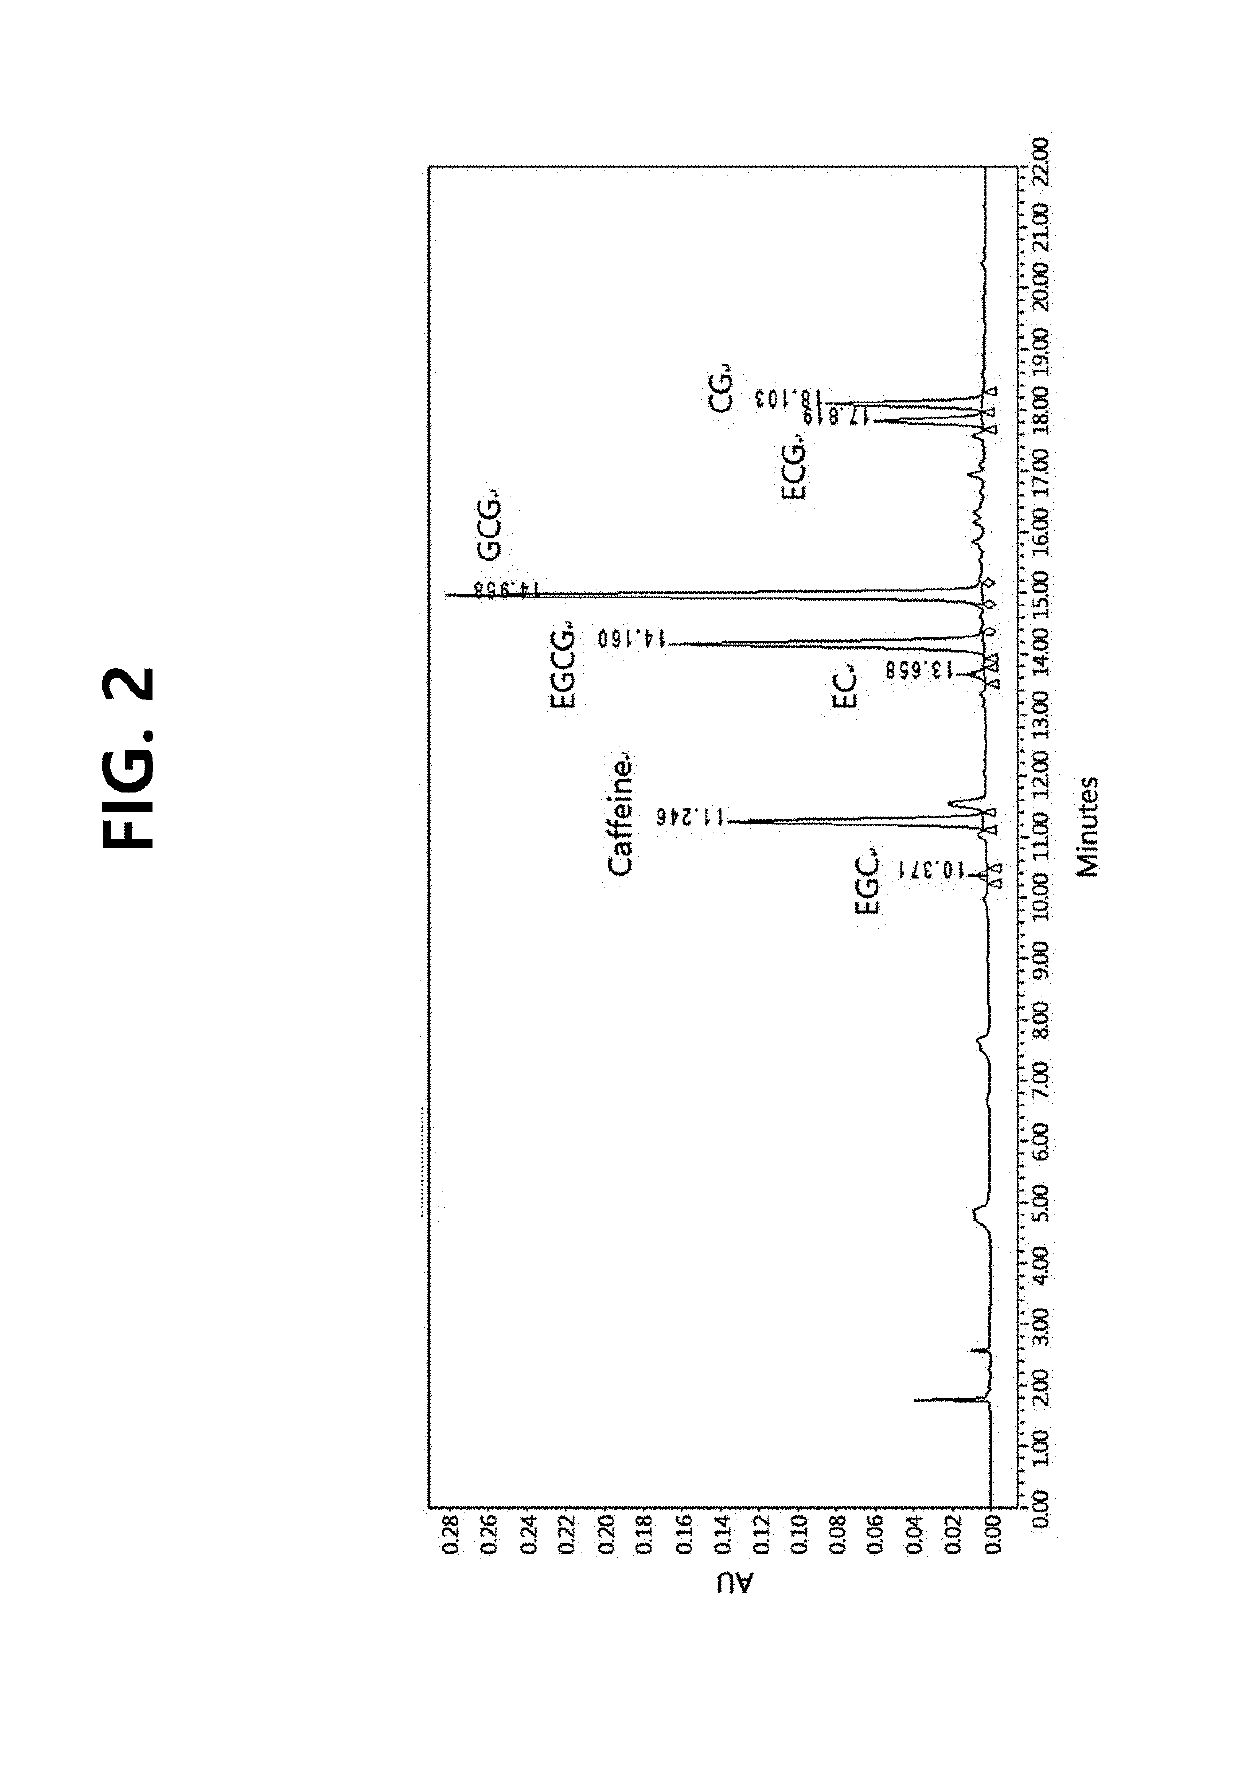 Composition for enhancing cognitive function comprising green tea extract which has modified amounts of ingredients